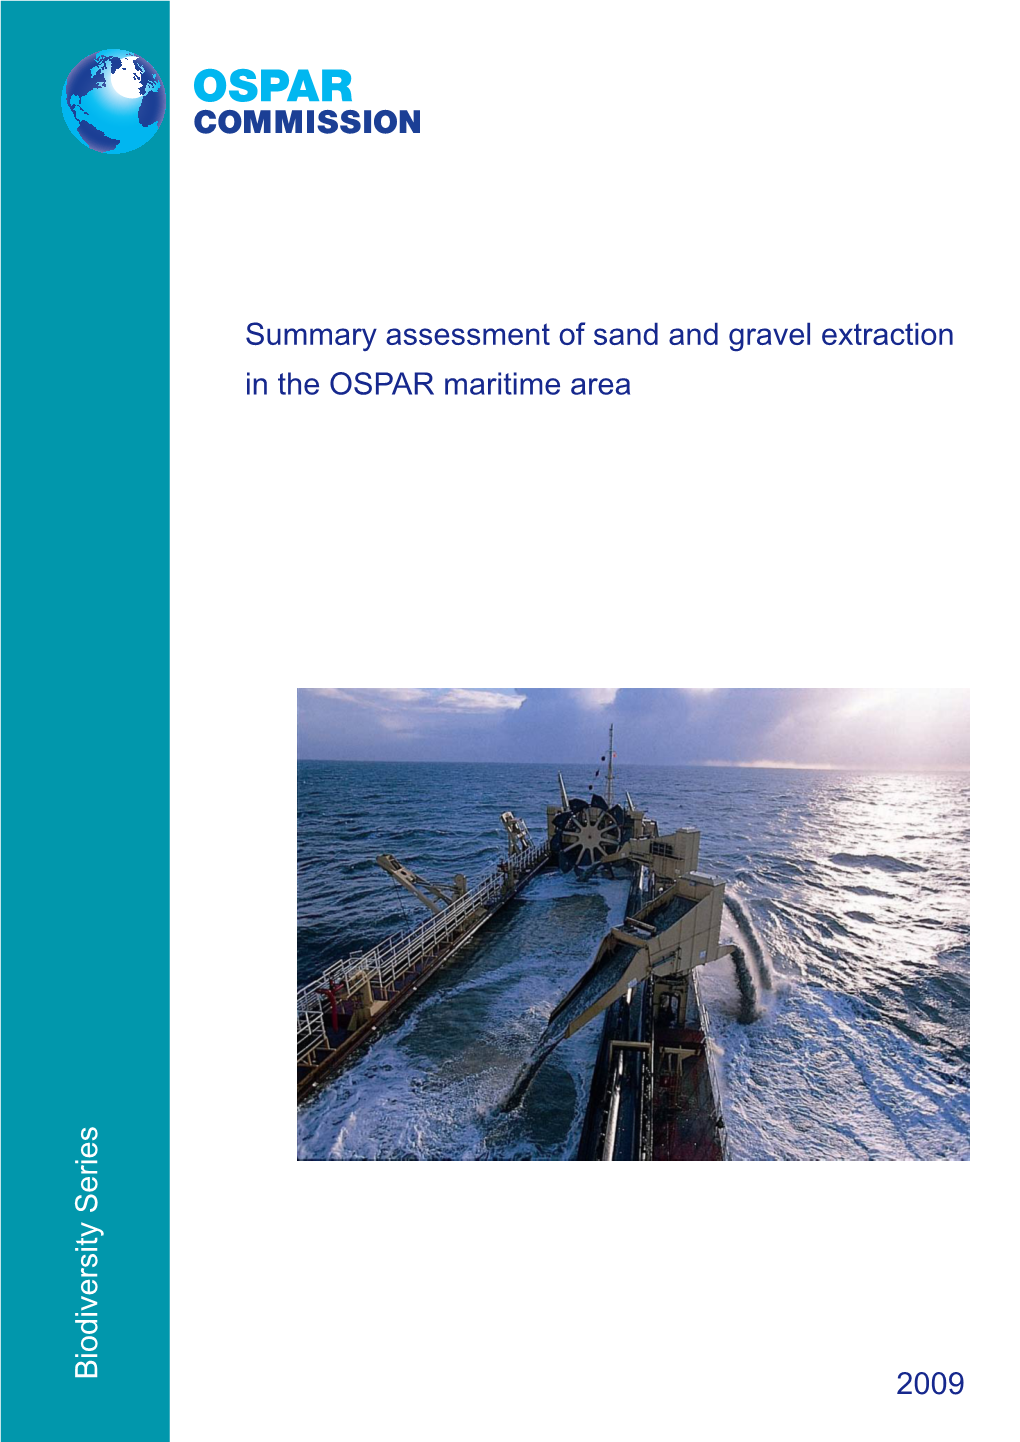 Summary Assessment of Sand and Gravel Extraction in the OSPAR Maritime Area